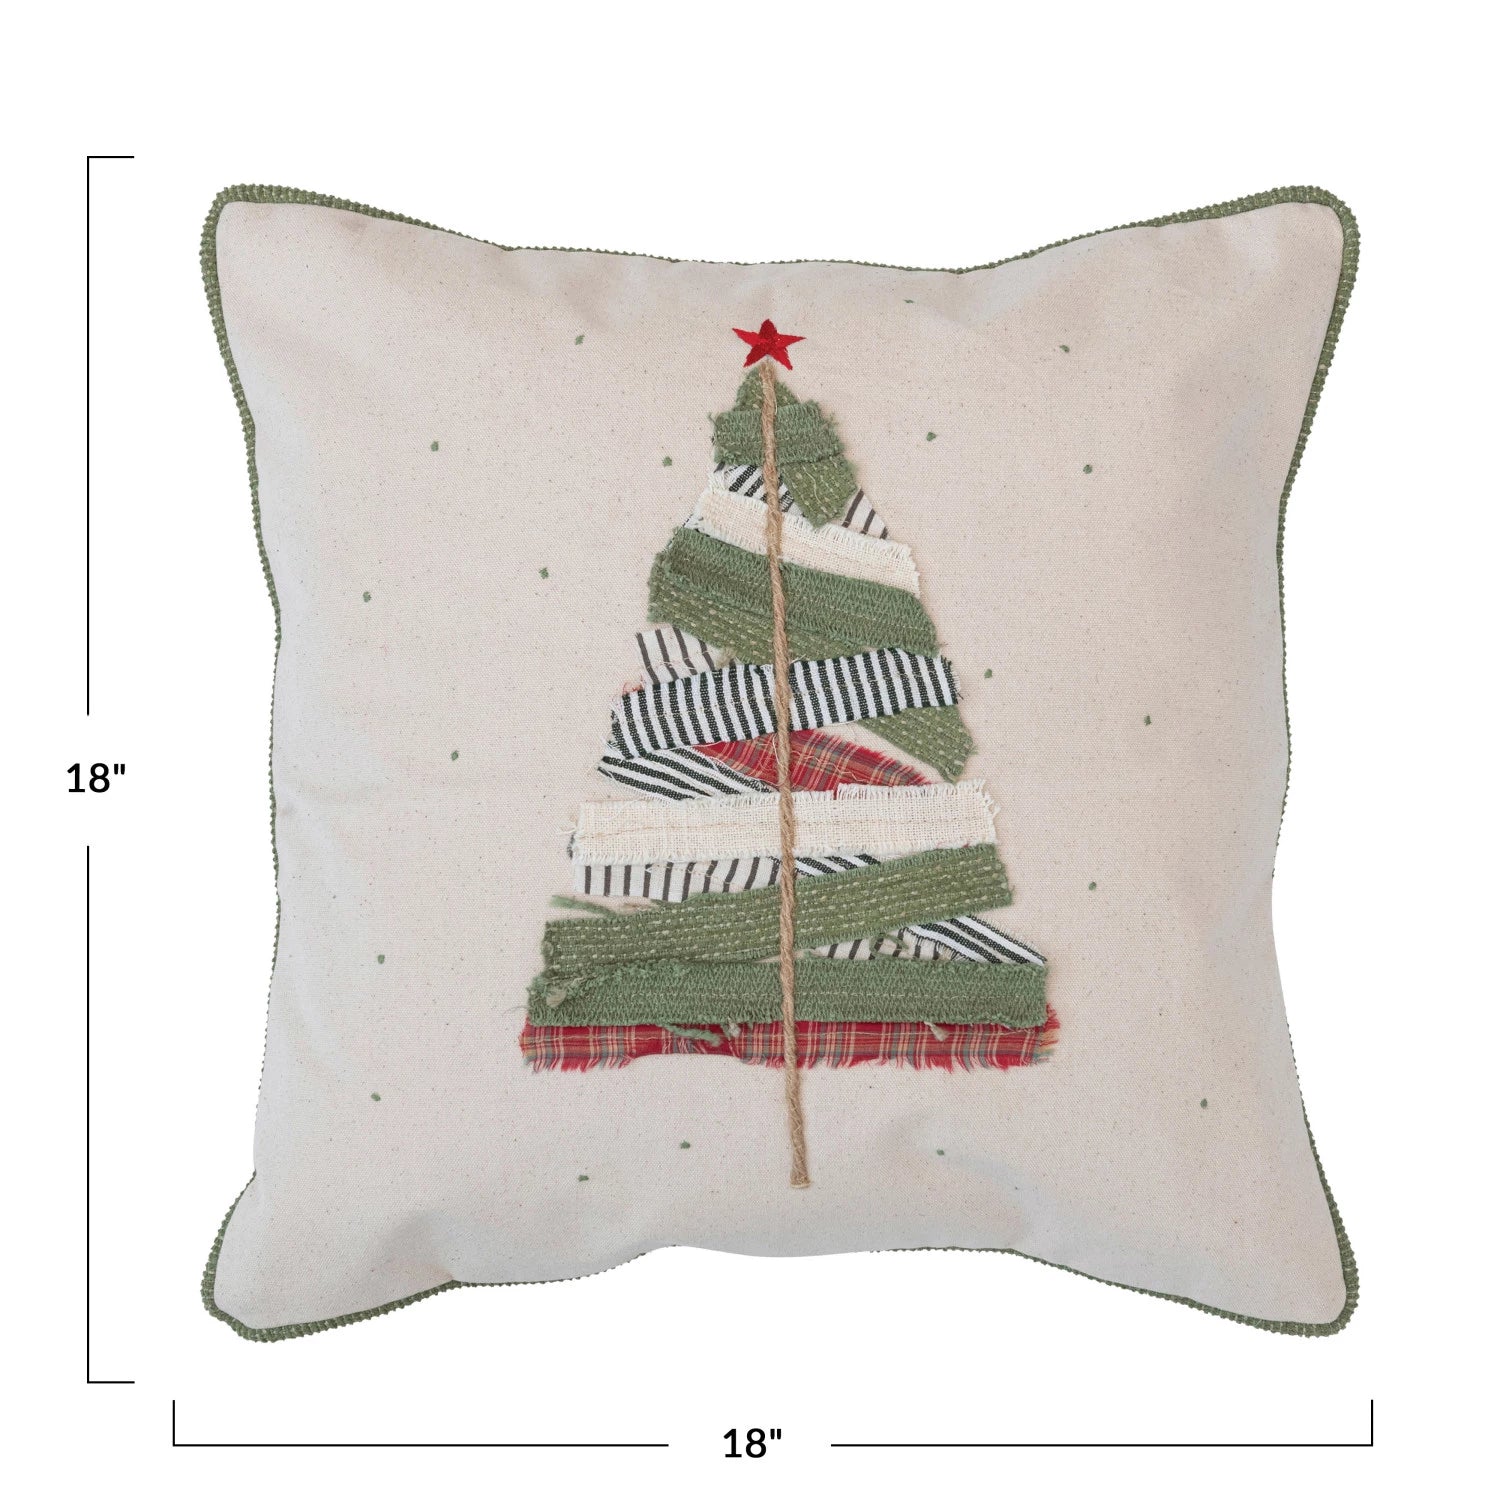 Square Cotton Pillow with Appliqued Tree